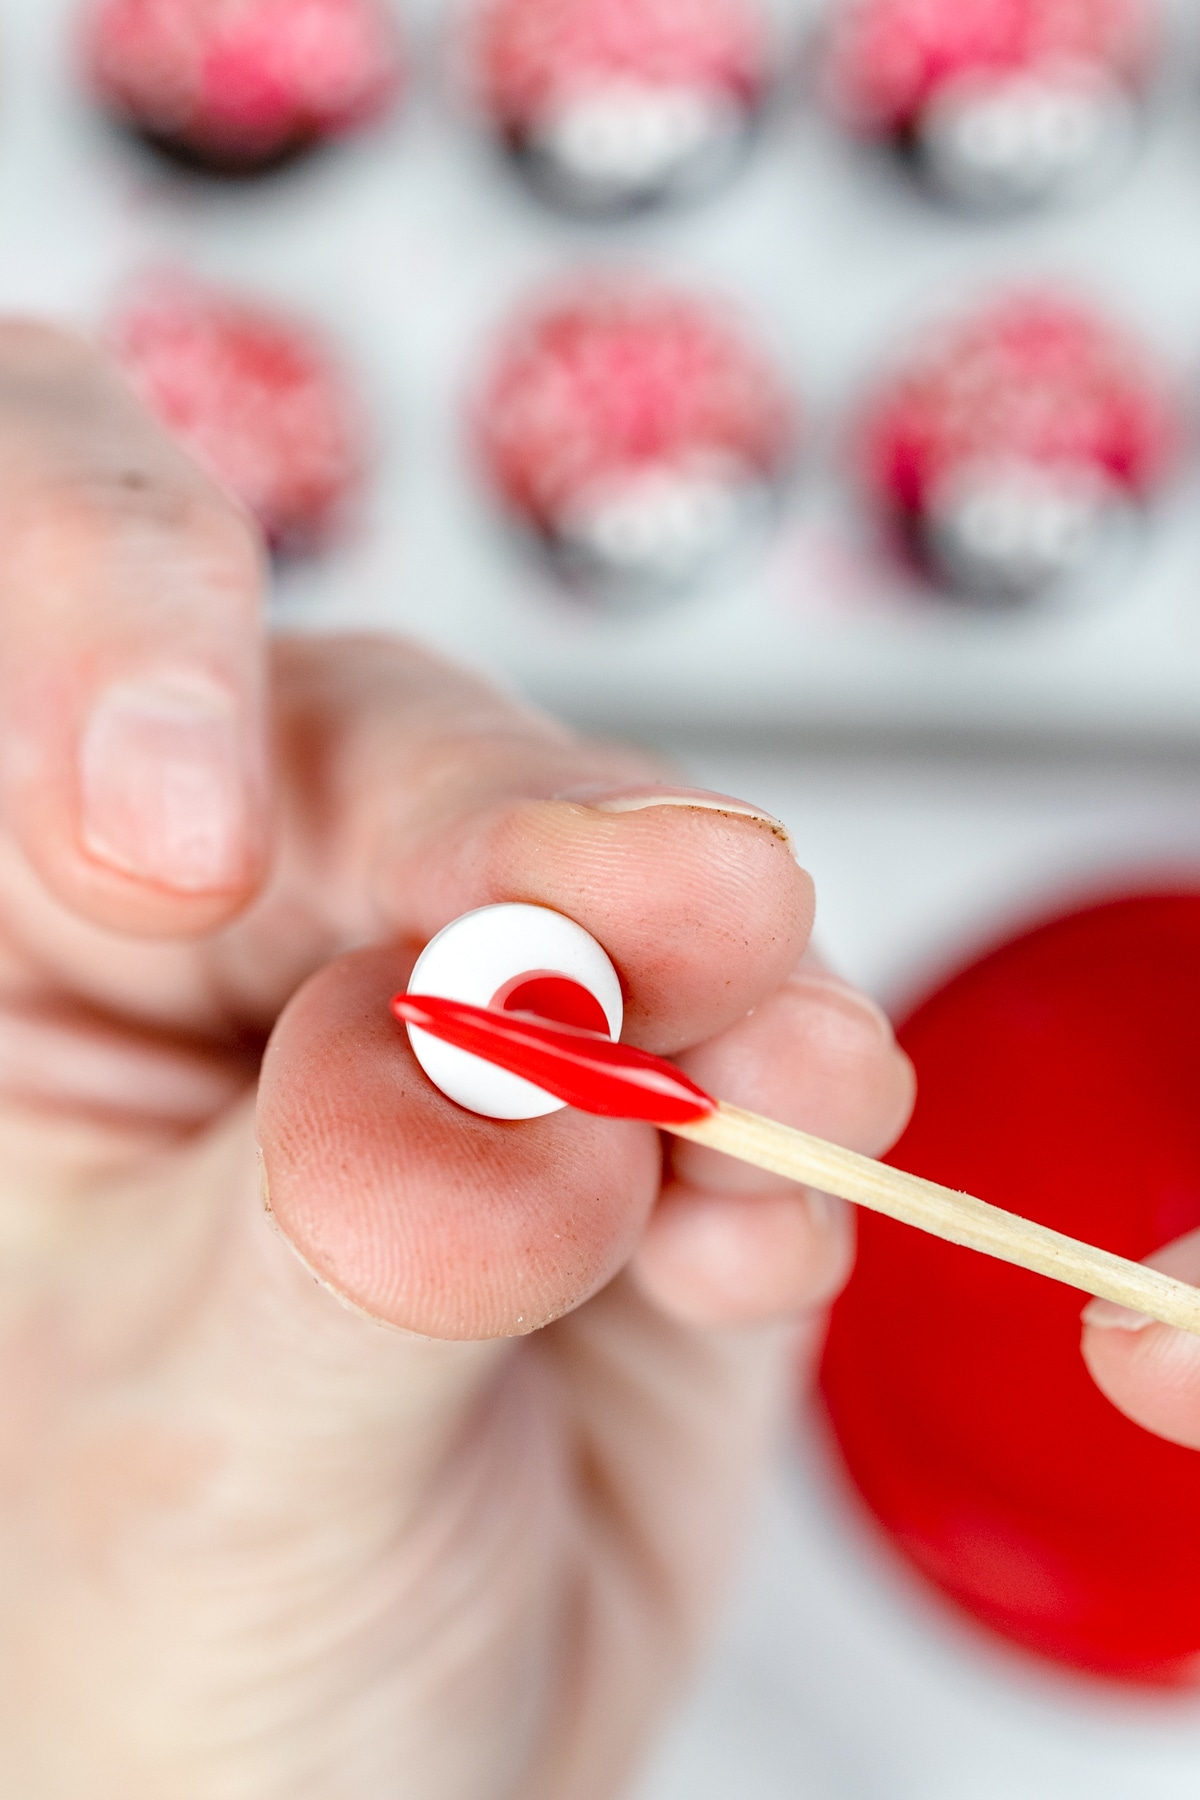 Close up of a hand holding up a candy eye ball with a toothpick being held, putting a dot of red icing onto the candy eyeball. 